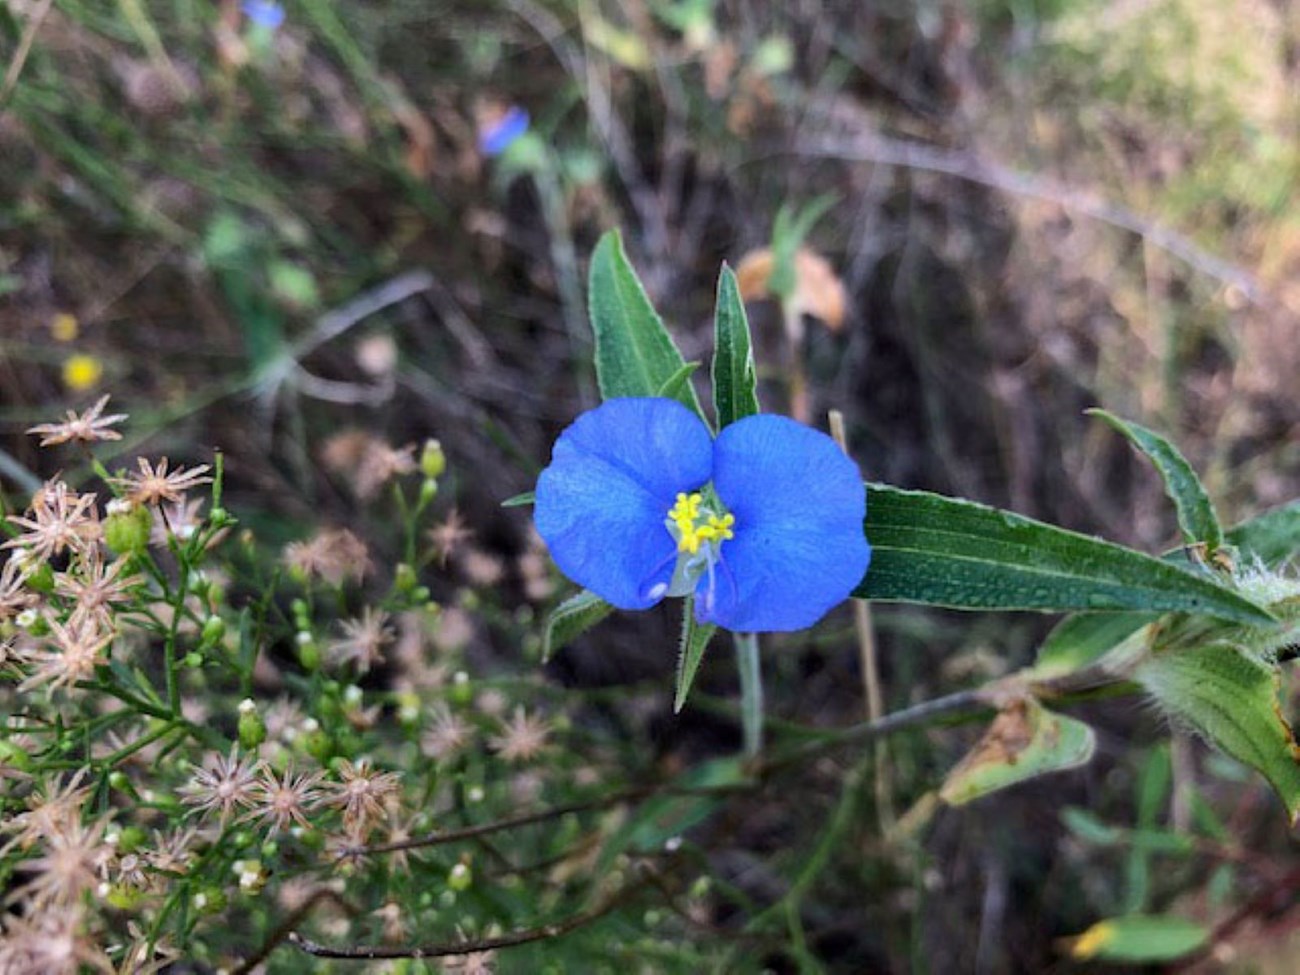 A blue Dayflower or Widow's Tears growing in the red dirt.